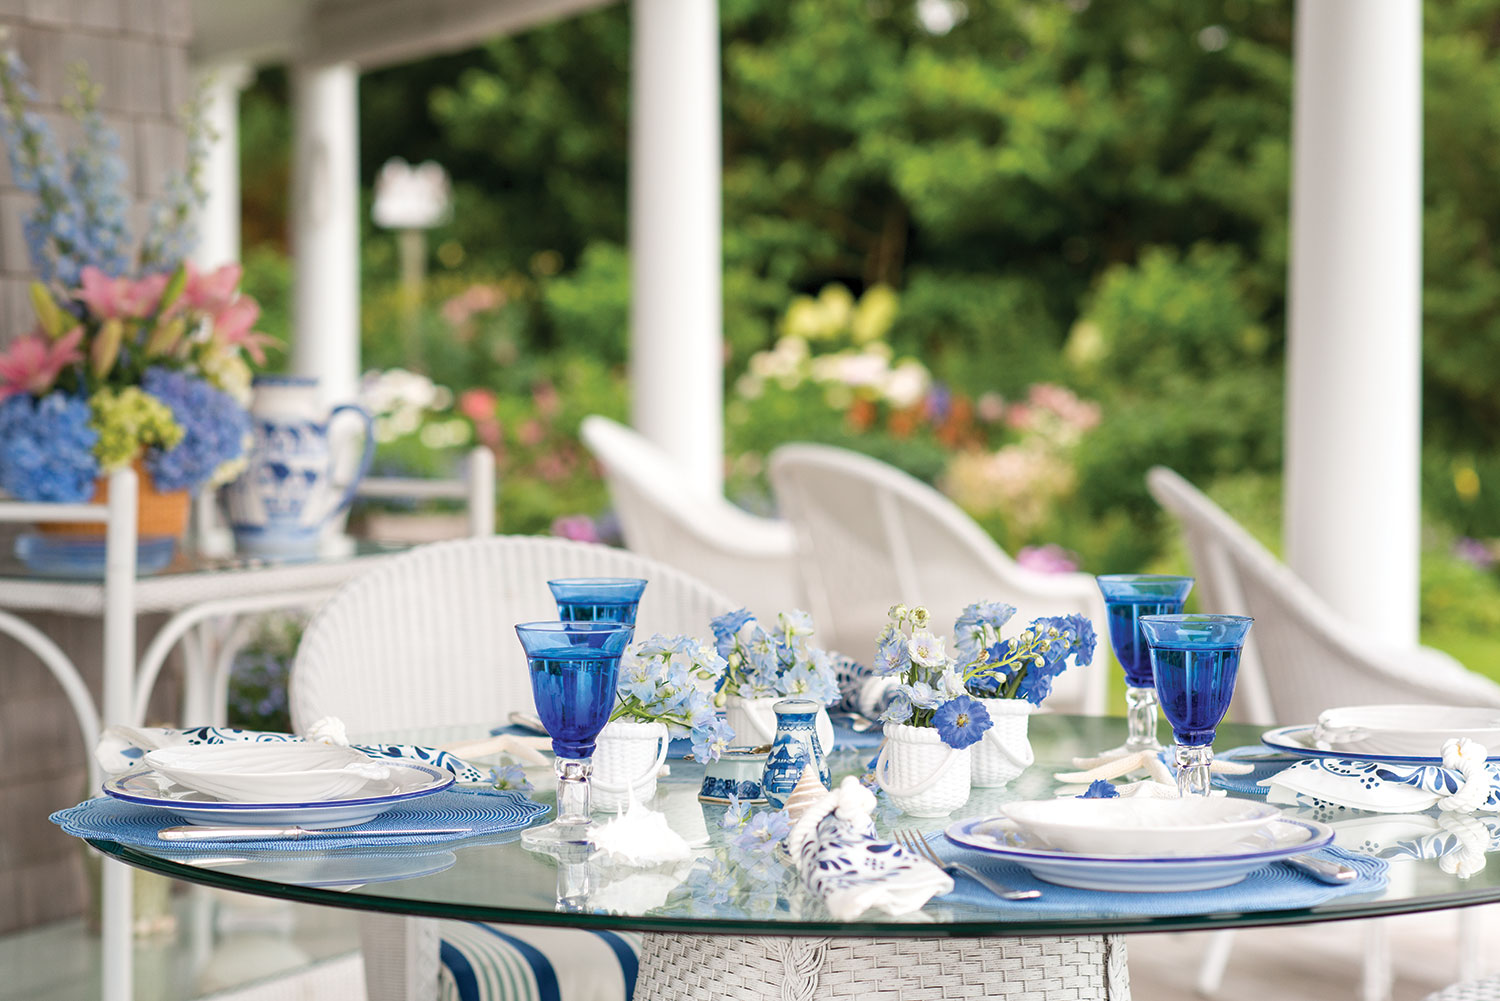 A glass table is set with blue finishes and flowers.